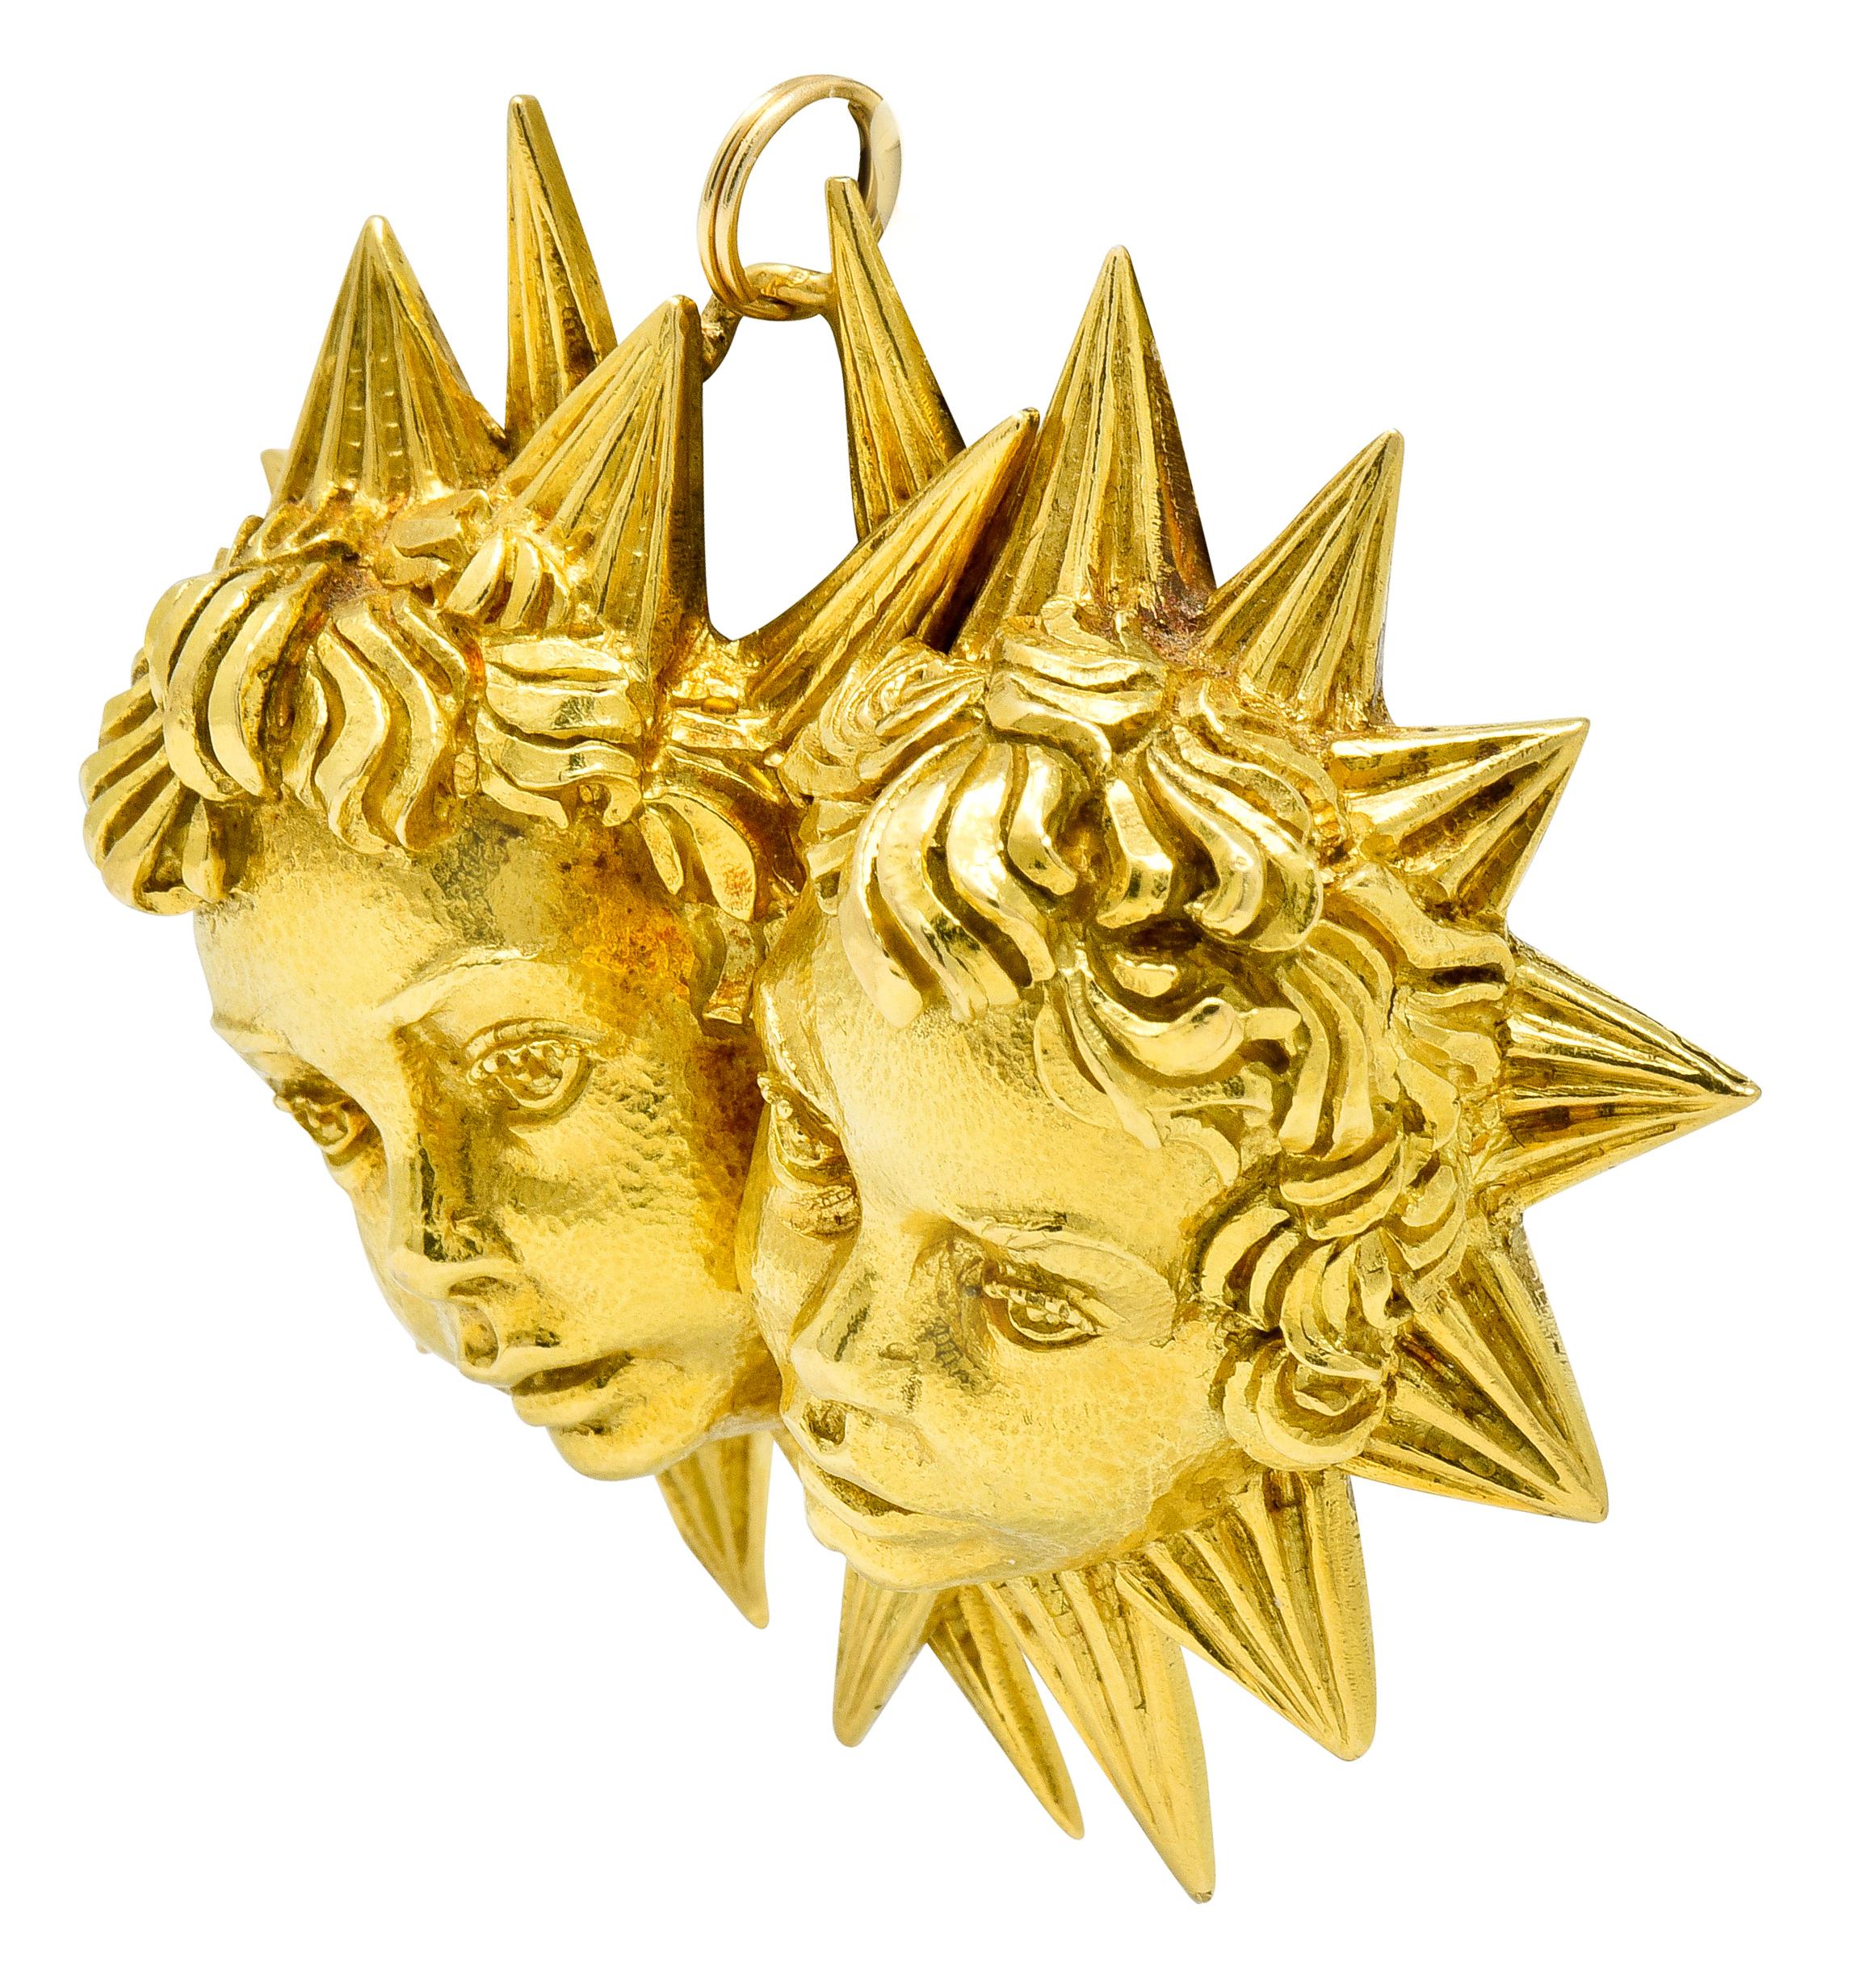 Substantial pendant designed as two highly rendered cherubic faces - symbolizing Gemini zodiac

With scrolled curls and detailed facial features, exhibiting a dimpled finish

Surrounded by a deeply ridged starburst motif with overlapping pointed